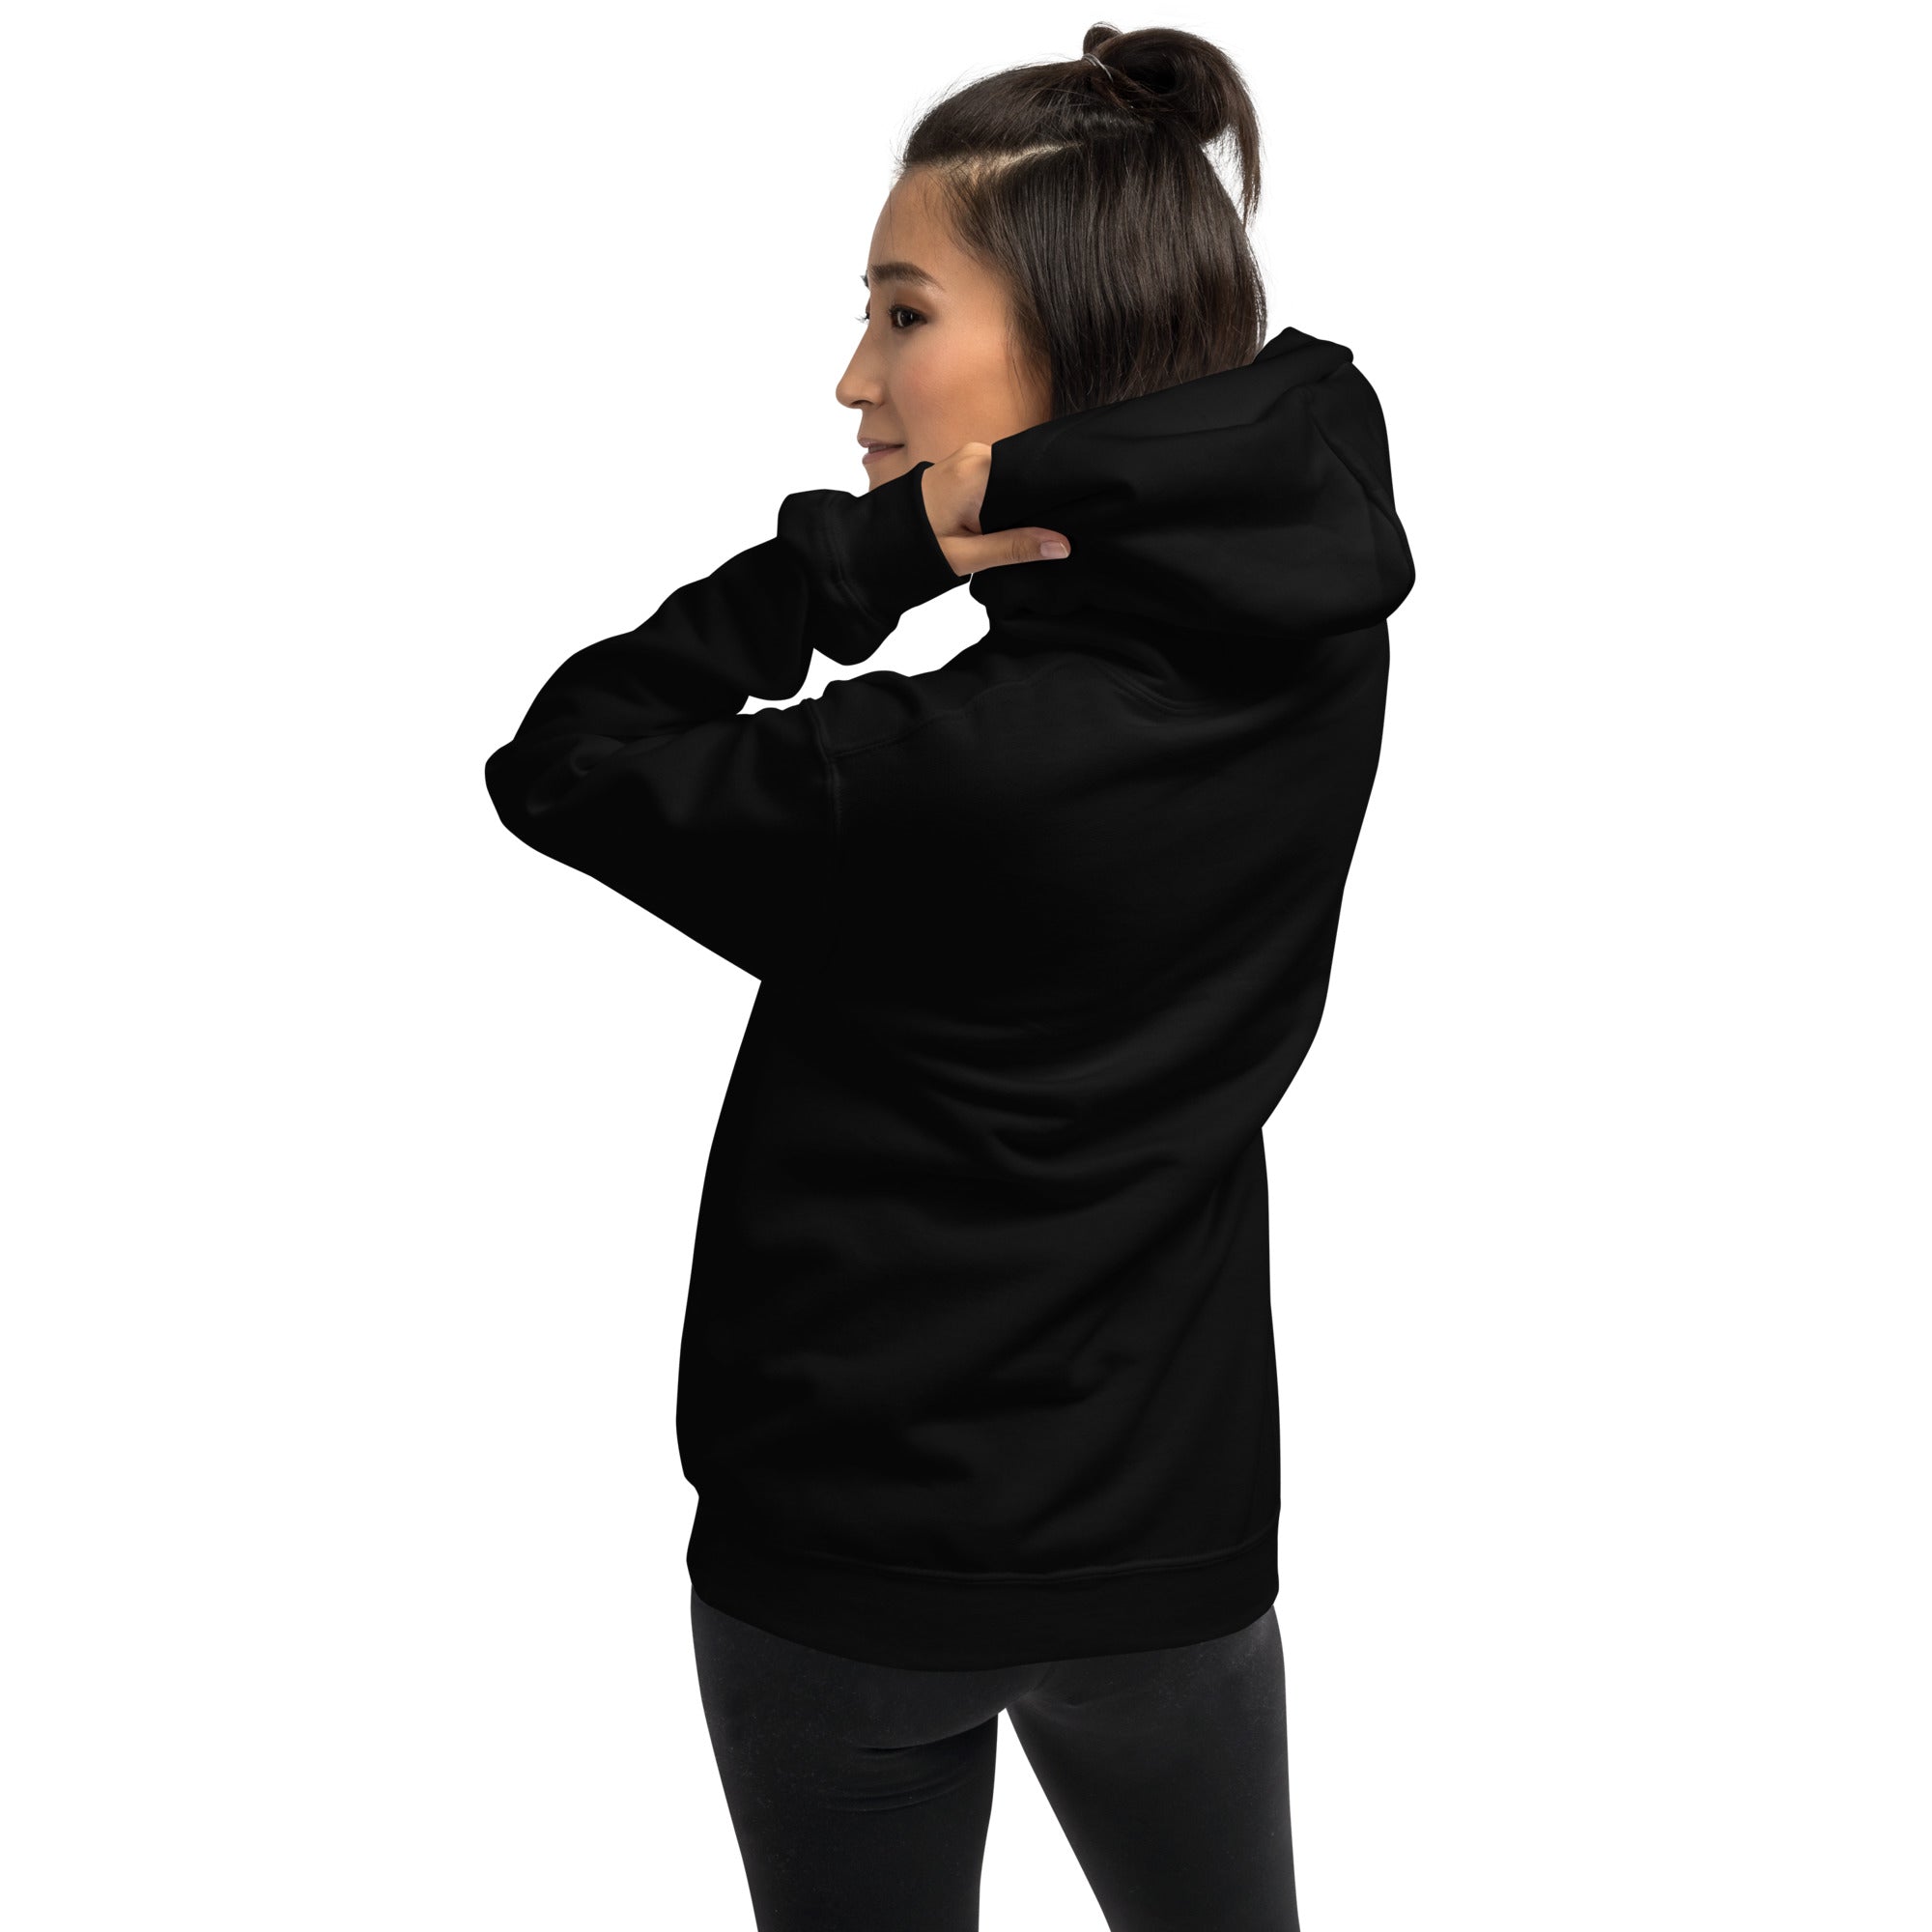 Barbell Warrior Gym Workout Hoodie for Women